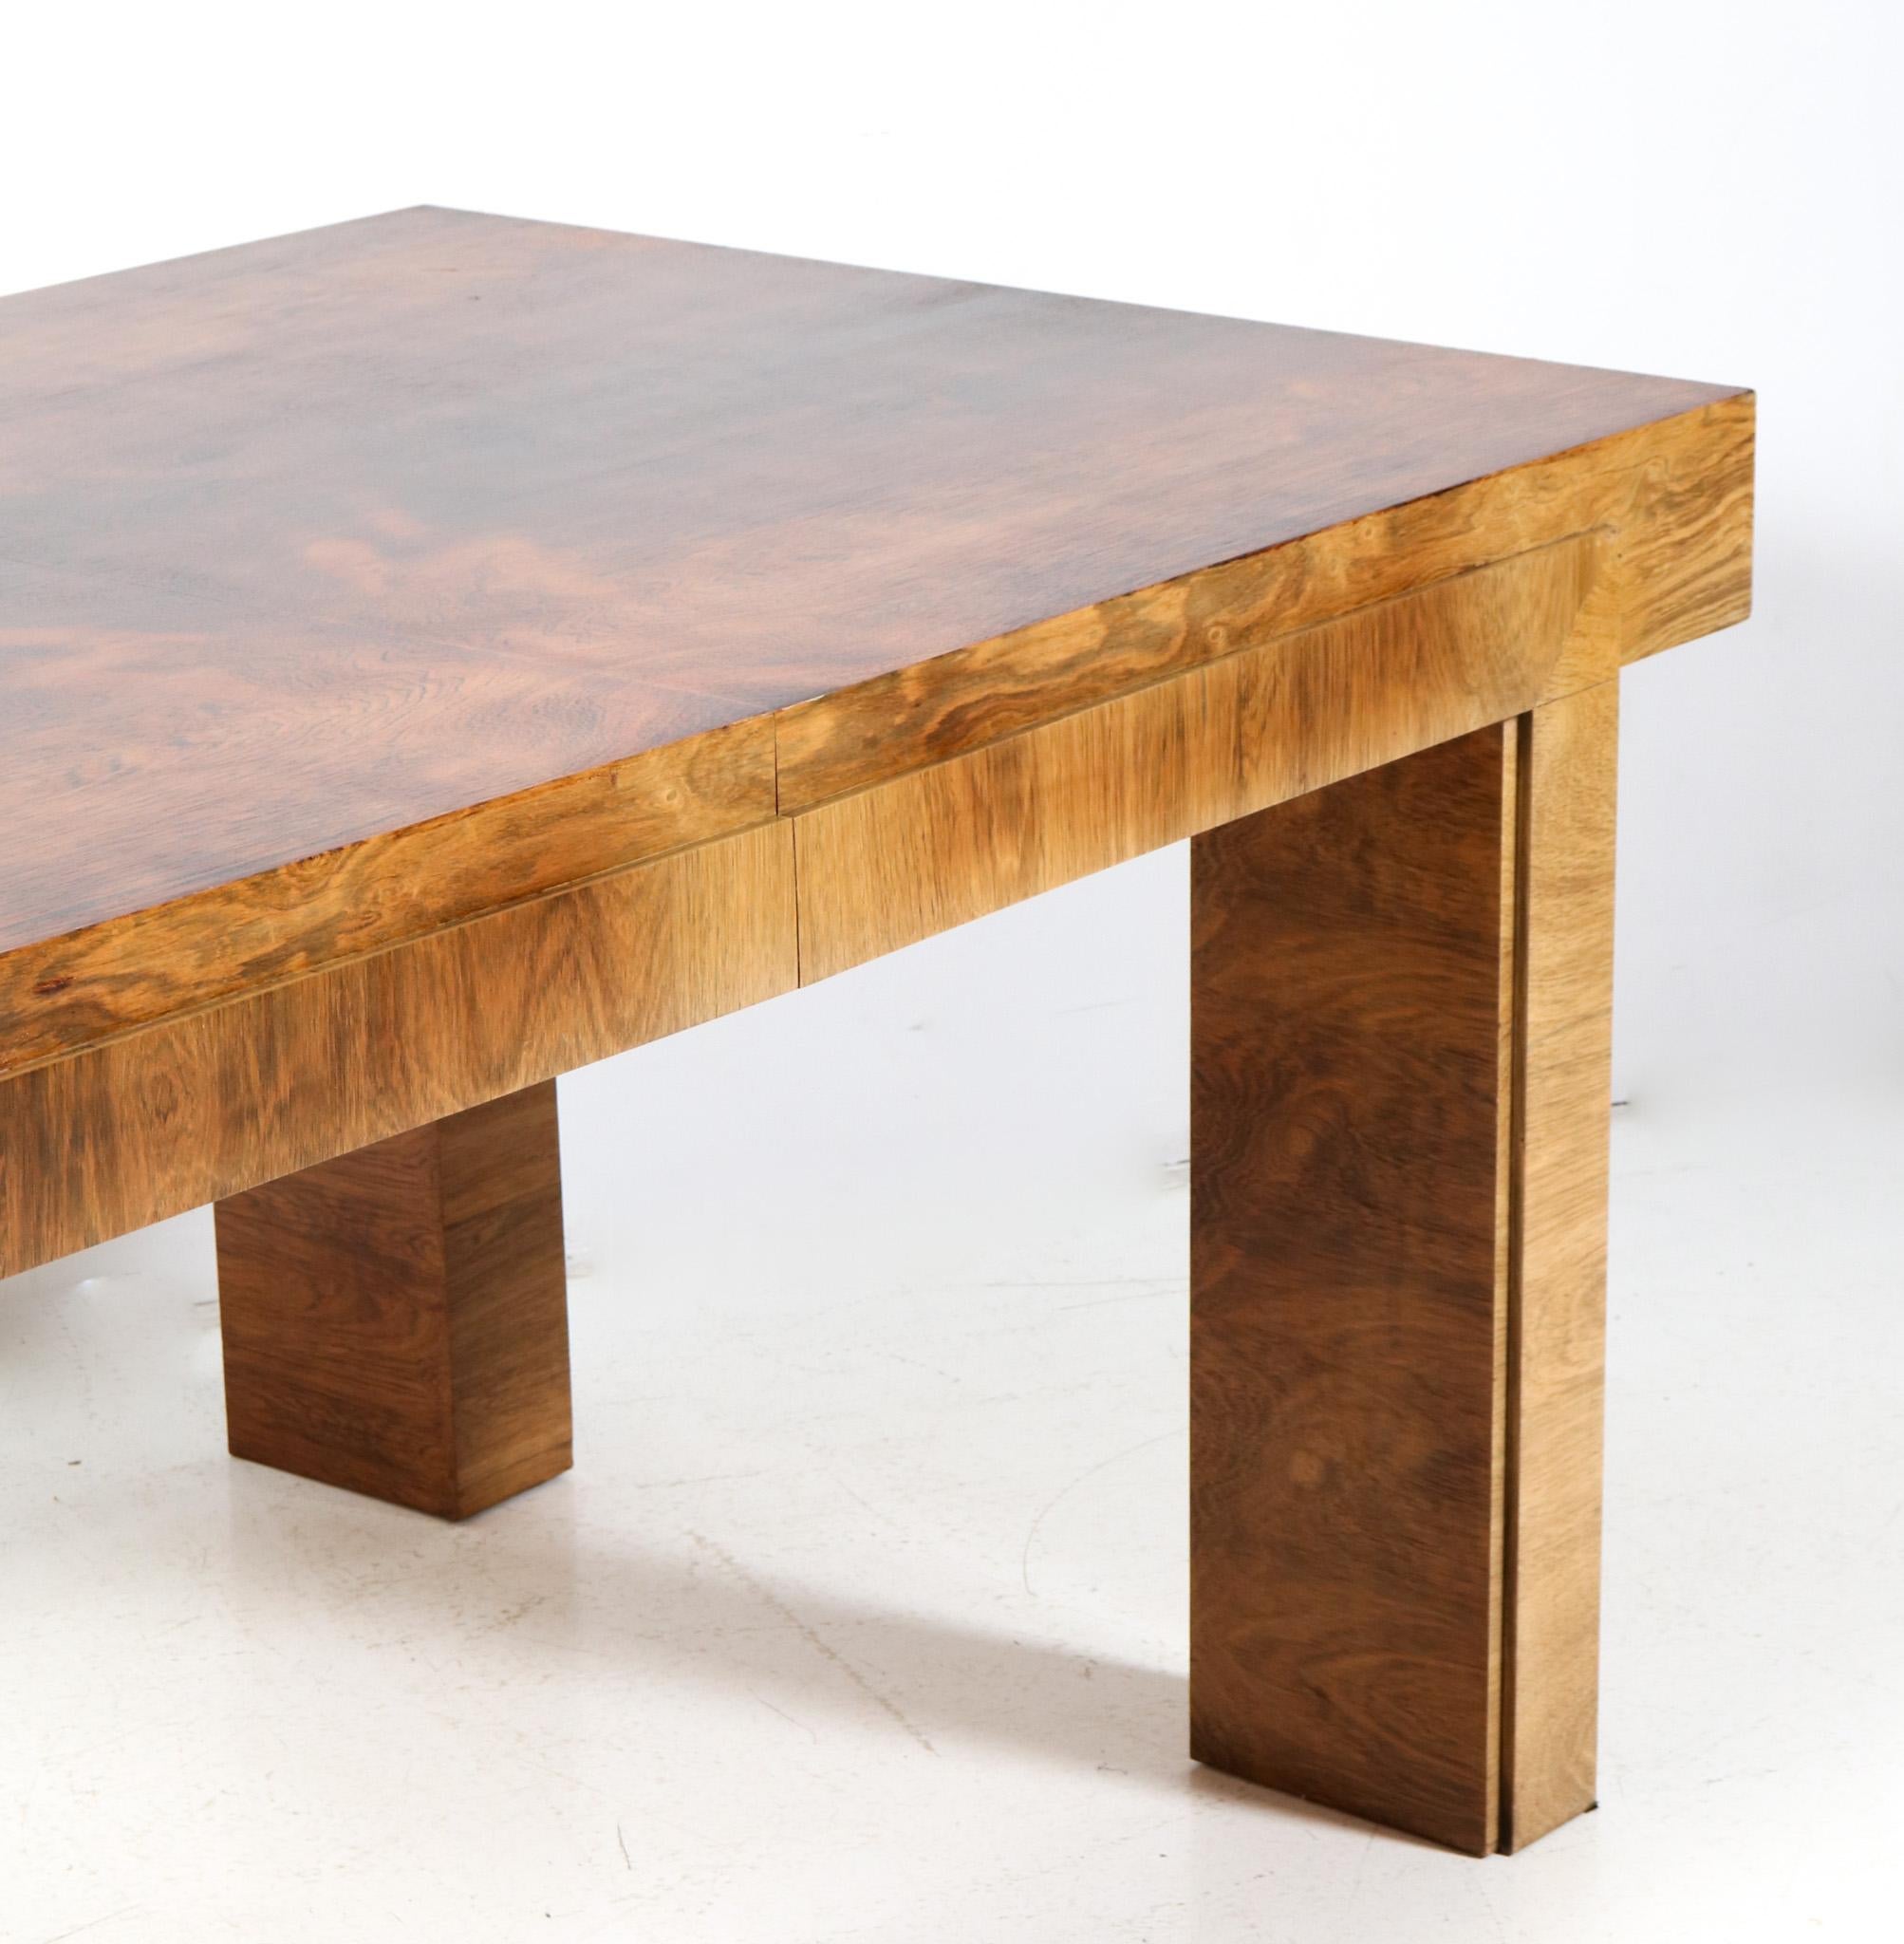  French Art Deco Walnut Table or Writing Table, 1930s For Sale 5